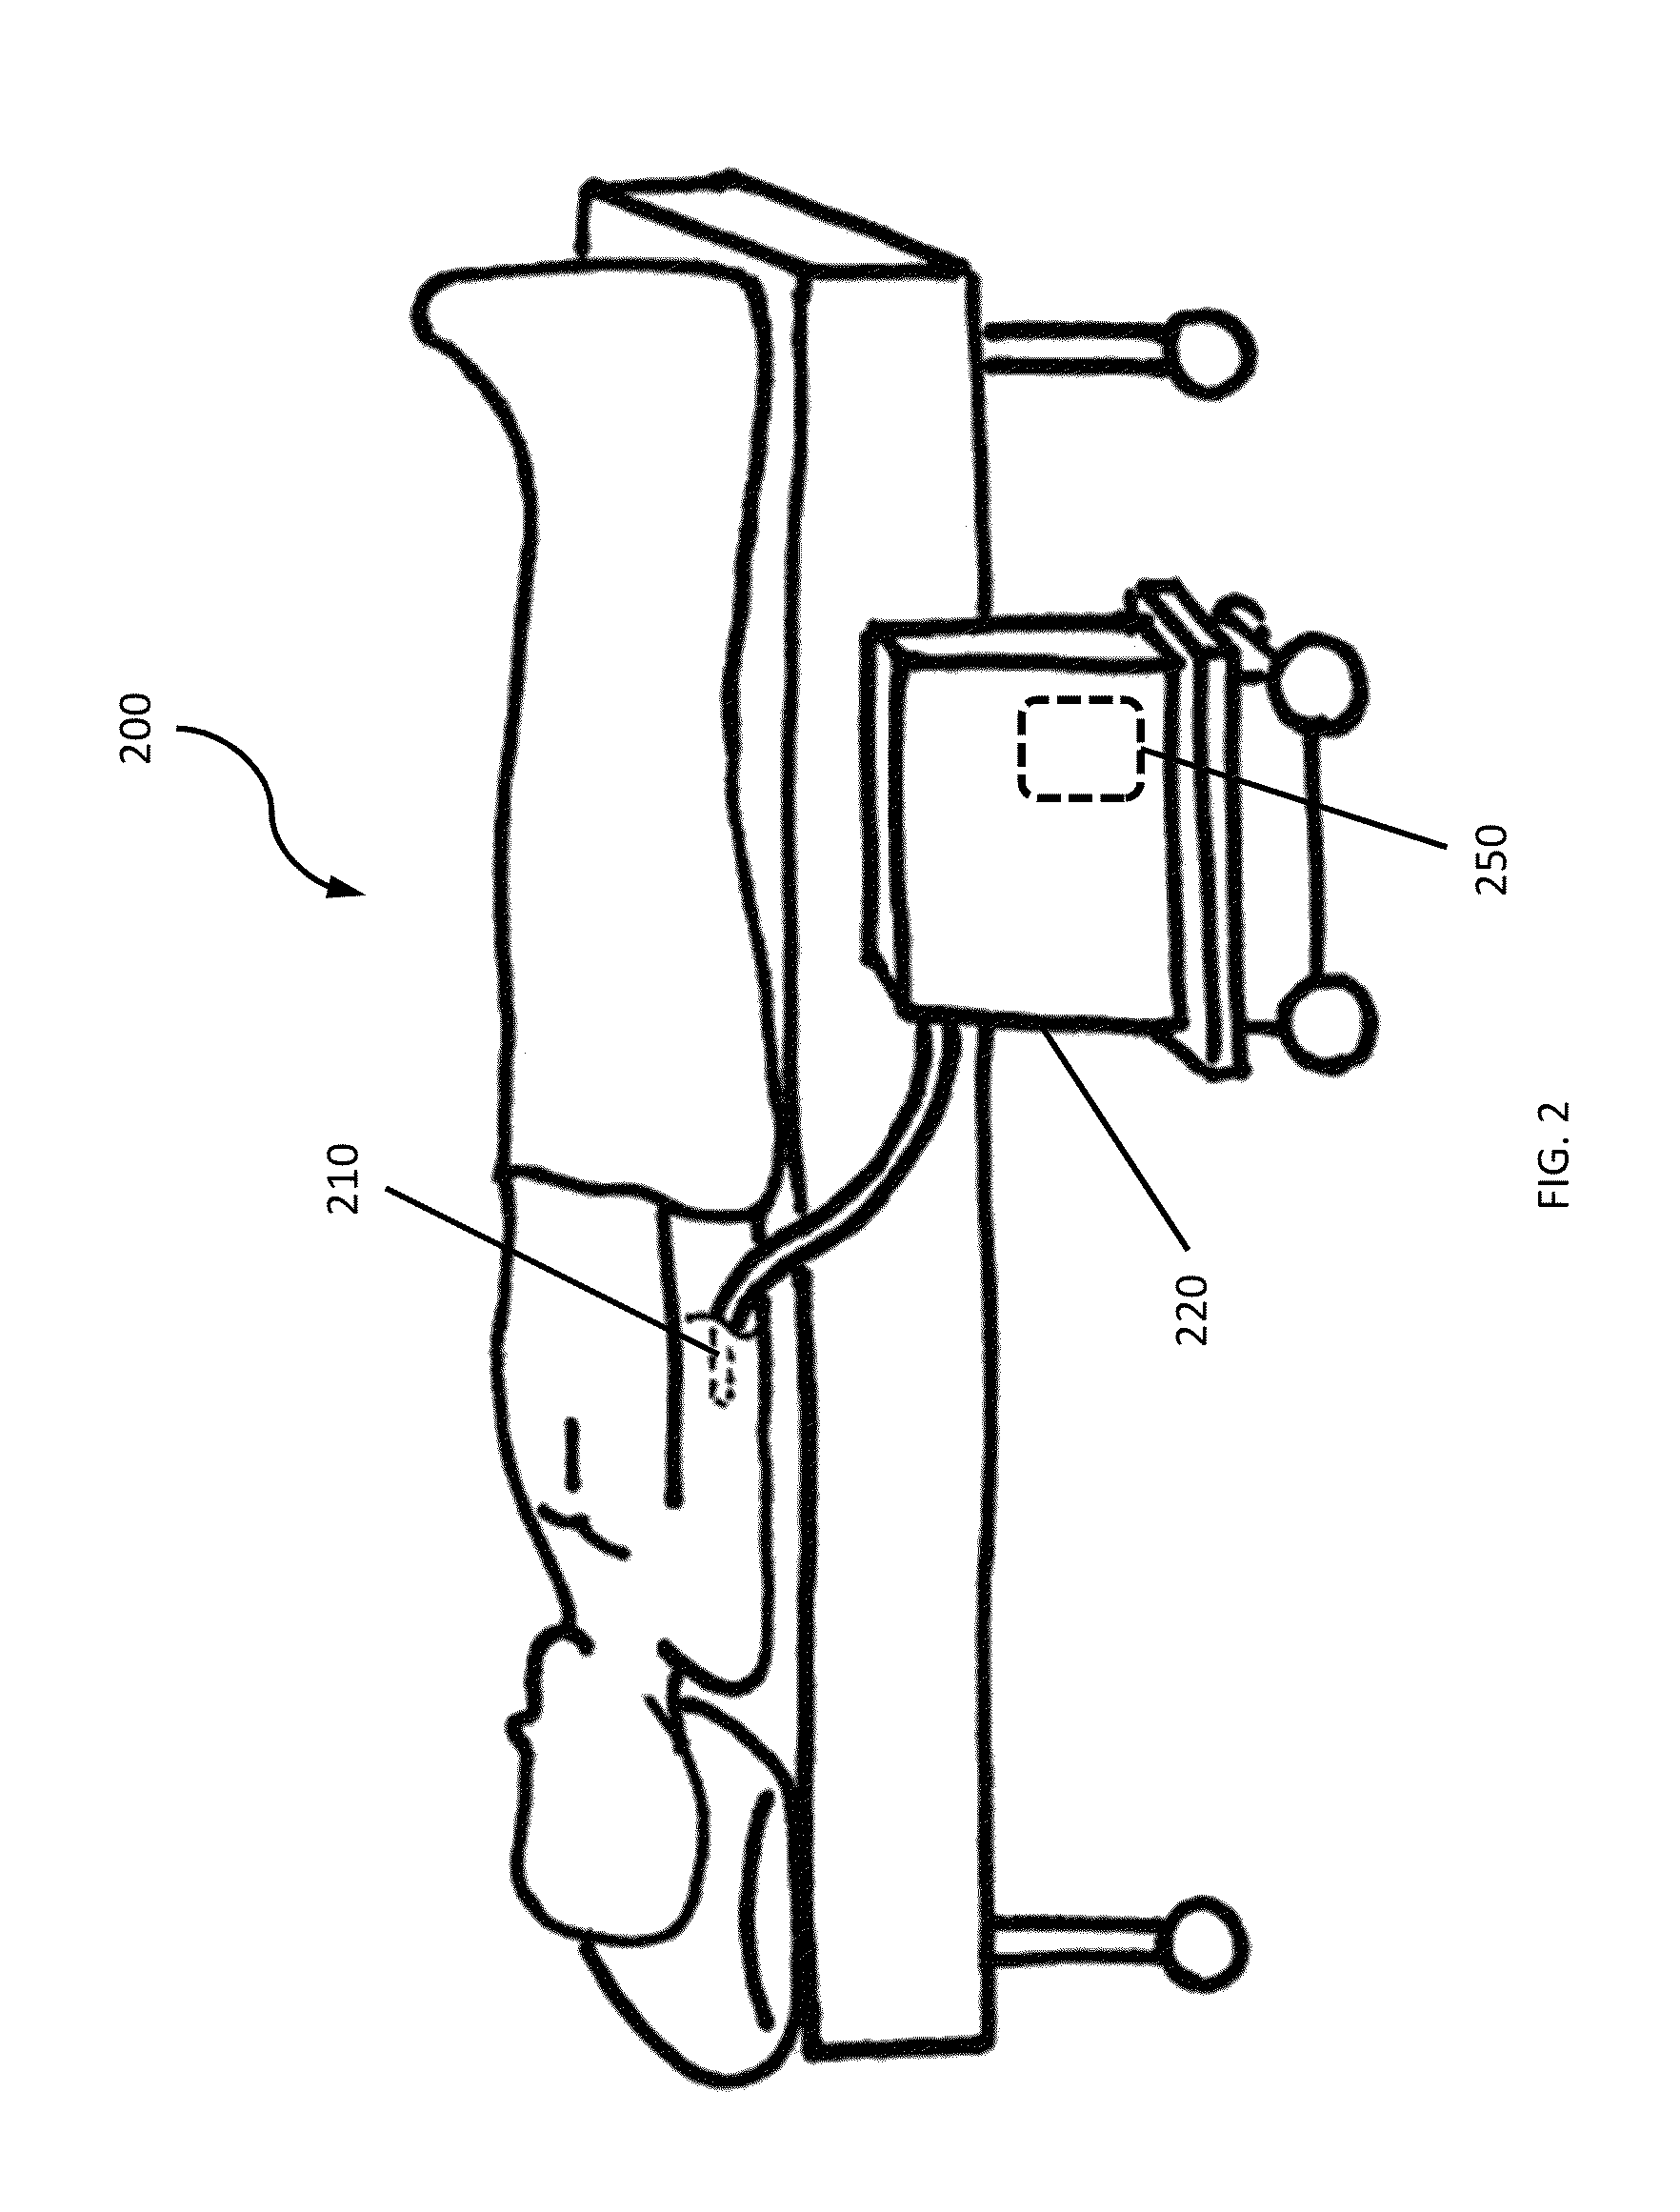 Cryolipolysis devices and methods therefor